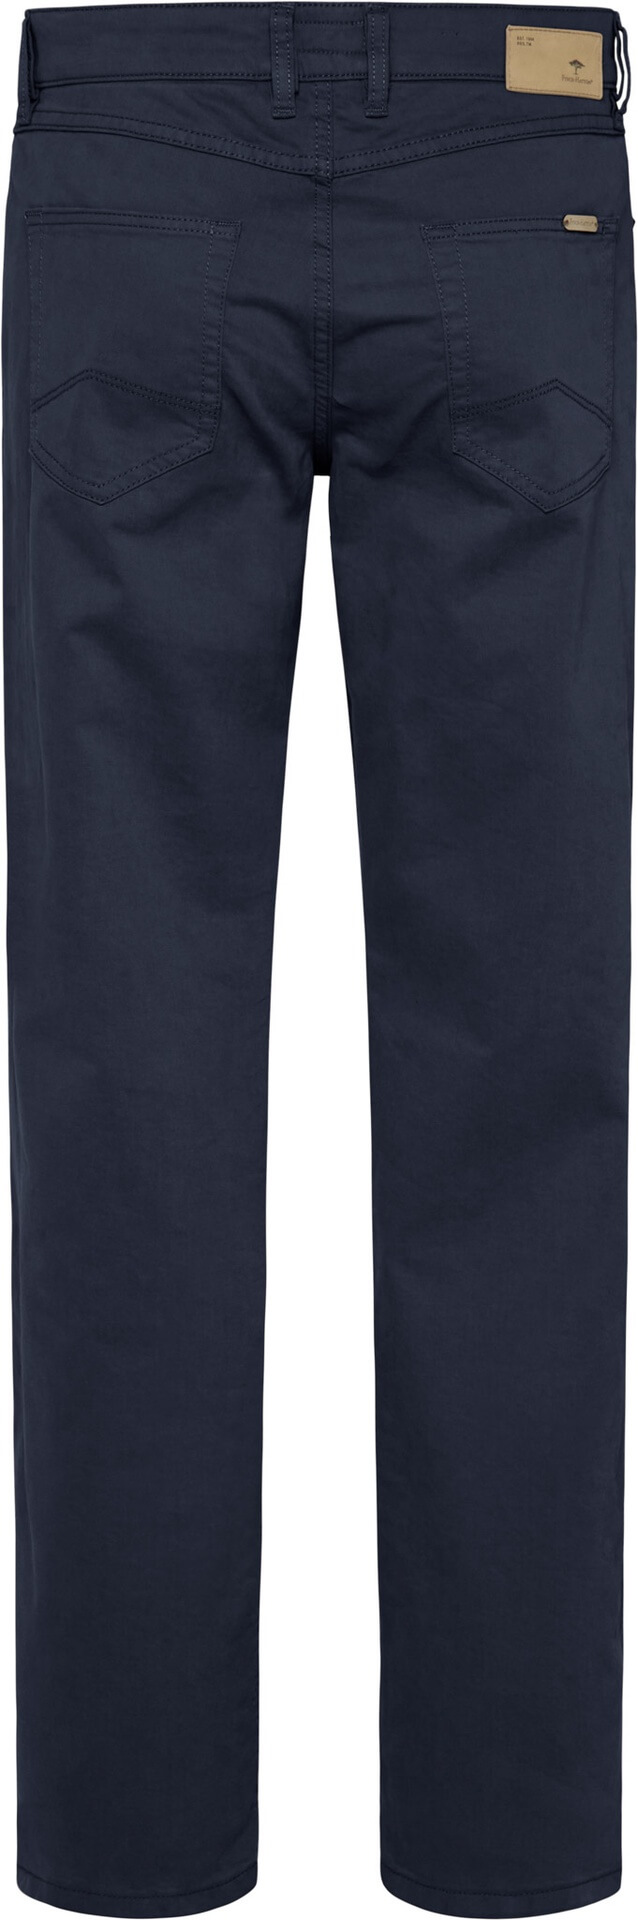 Fynch Hatton Navy Trousers